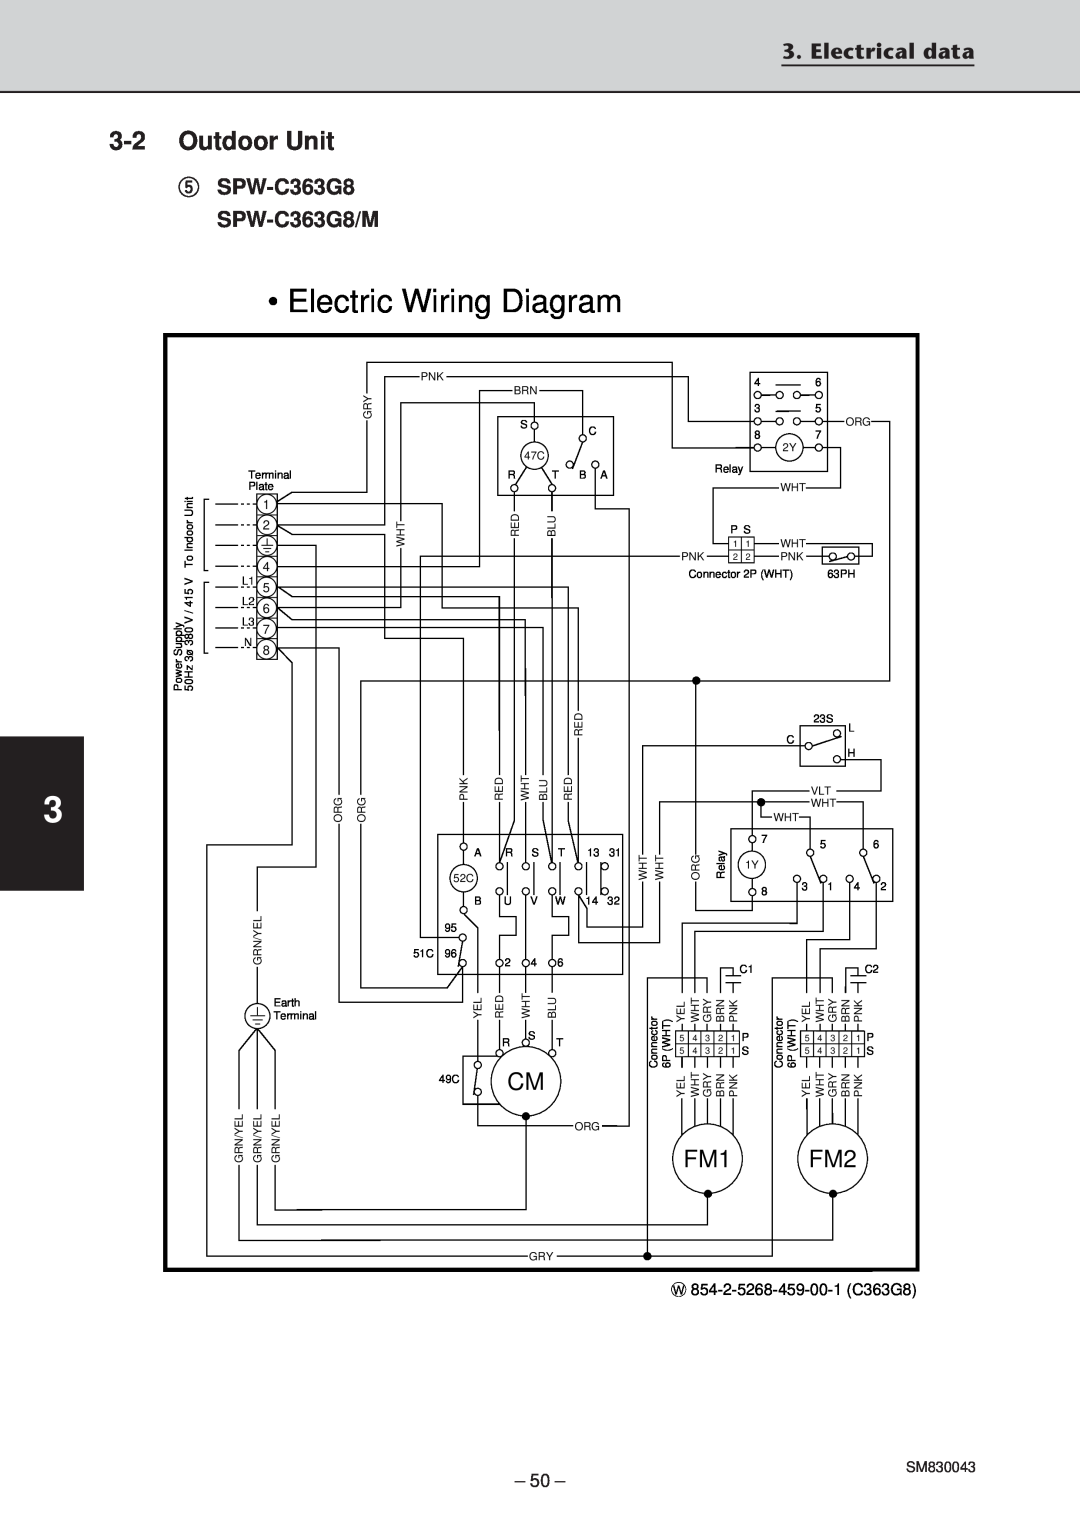 Sanyo SPW-T483GS56, SPW-T363GS56 Electric Wiring Diagram, 3-2Outdoor Unit, Electrical data, 5SPW-C363G8 SPW-C363G8/M 